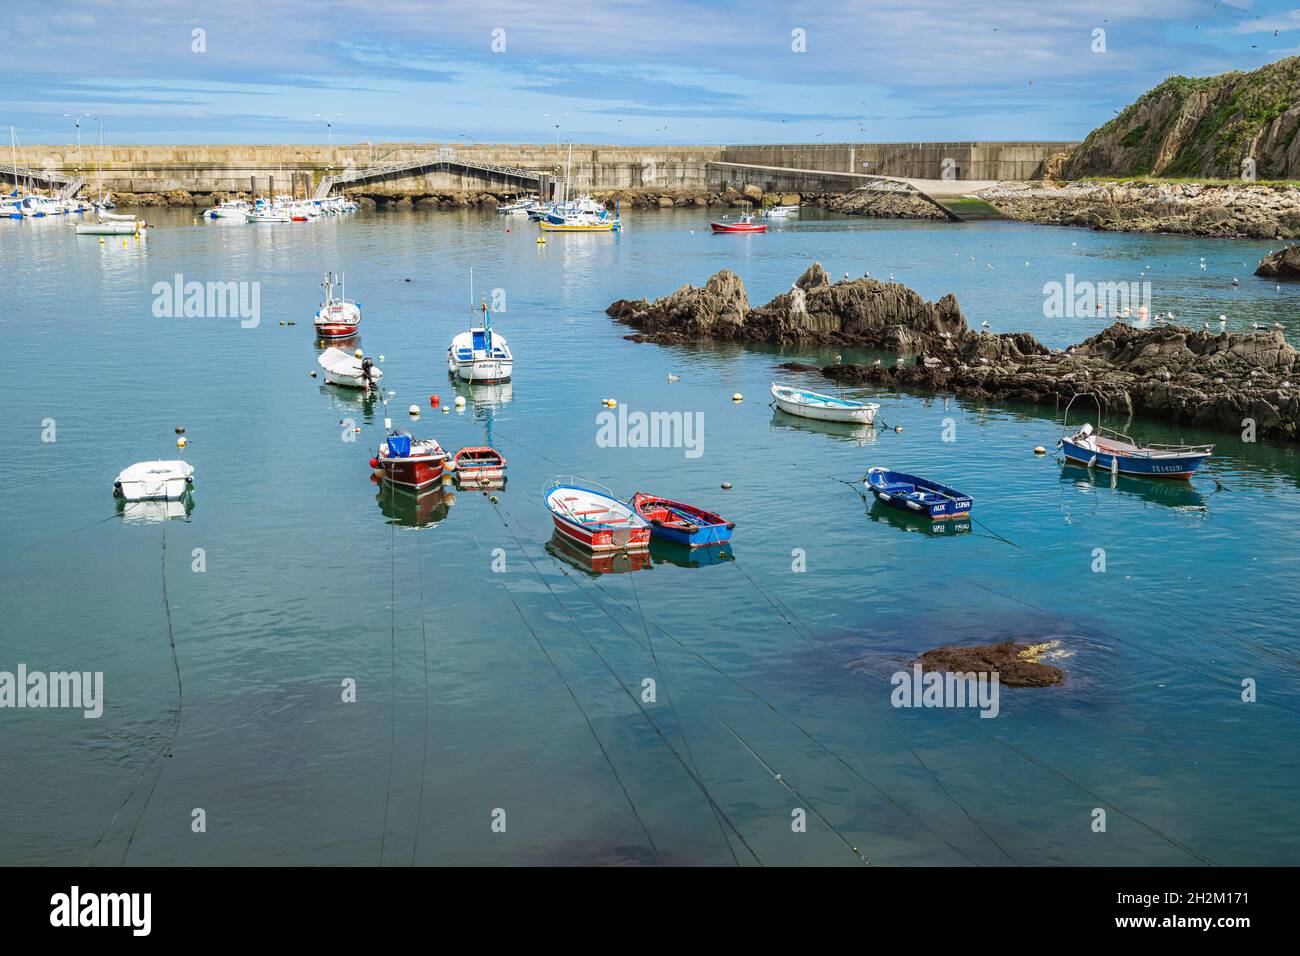 Picturesque fishing port in the small village of Cudillero, Asturias, Spain. Stock Photo